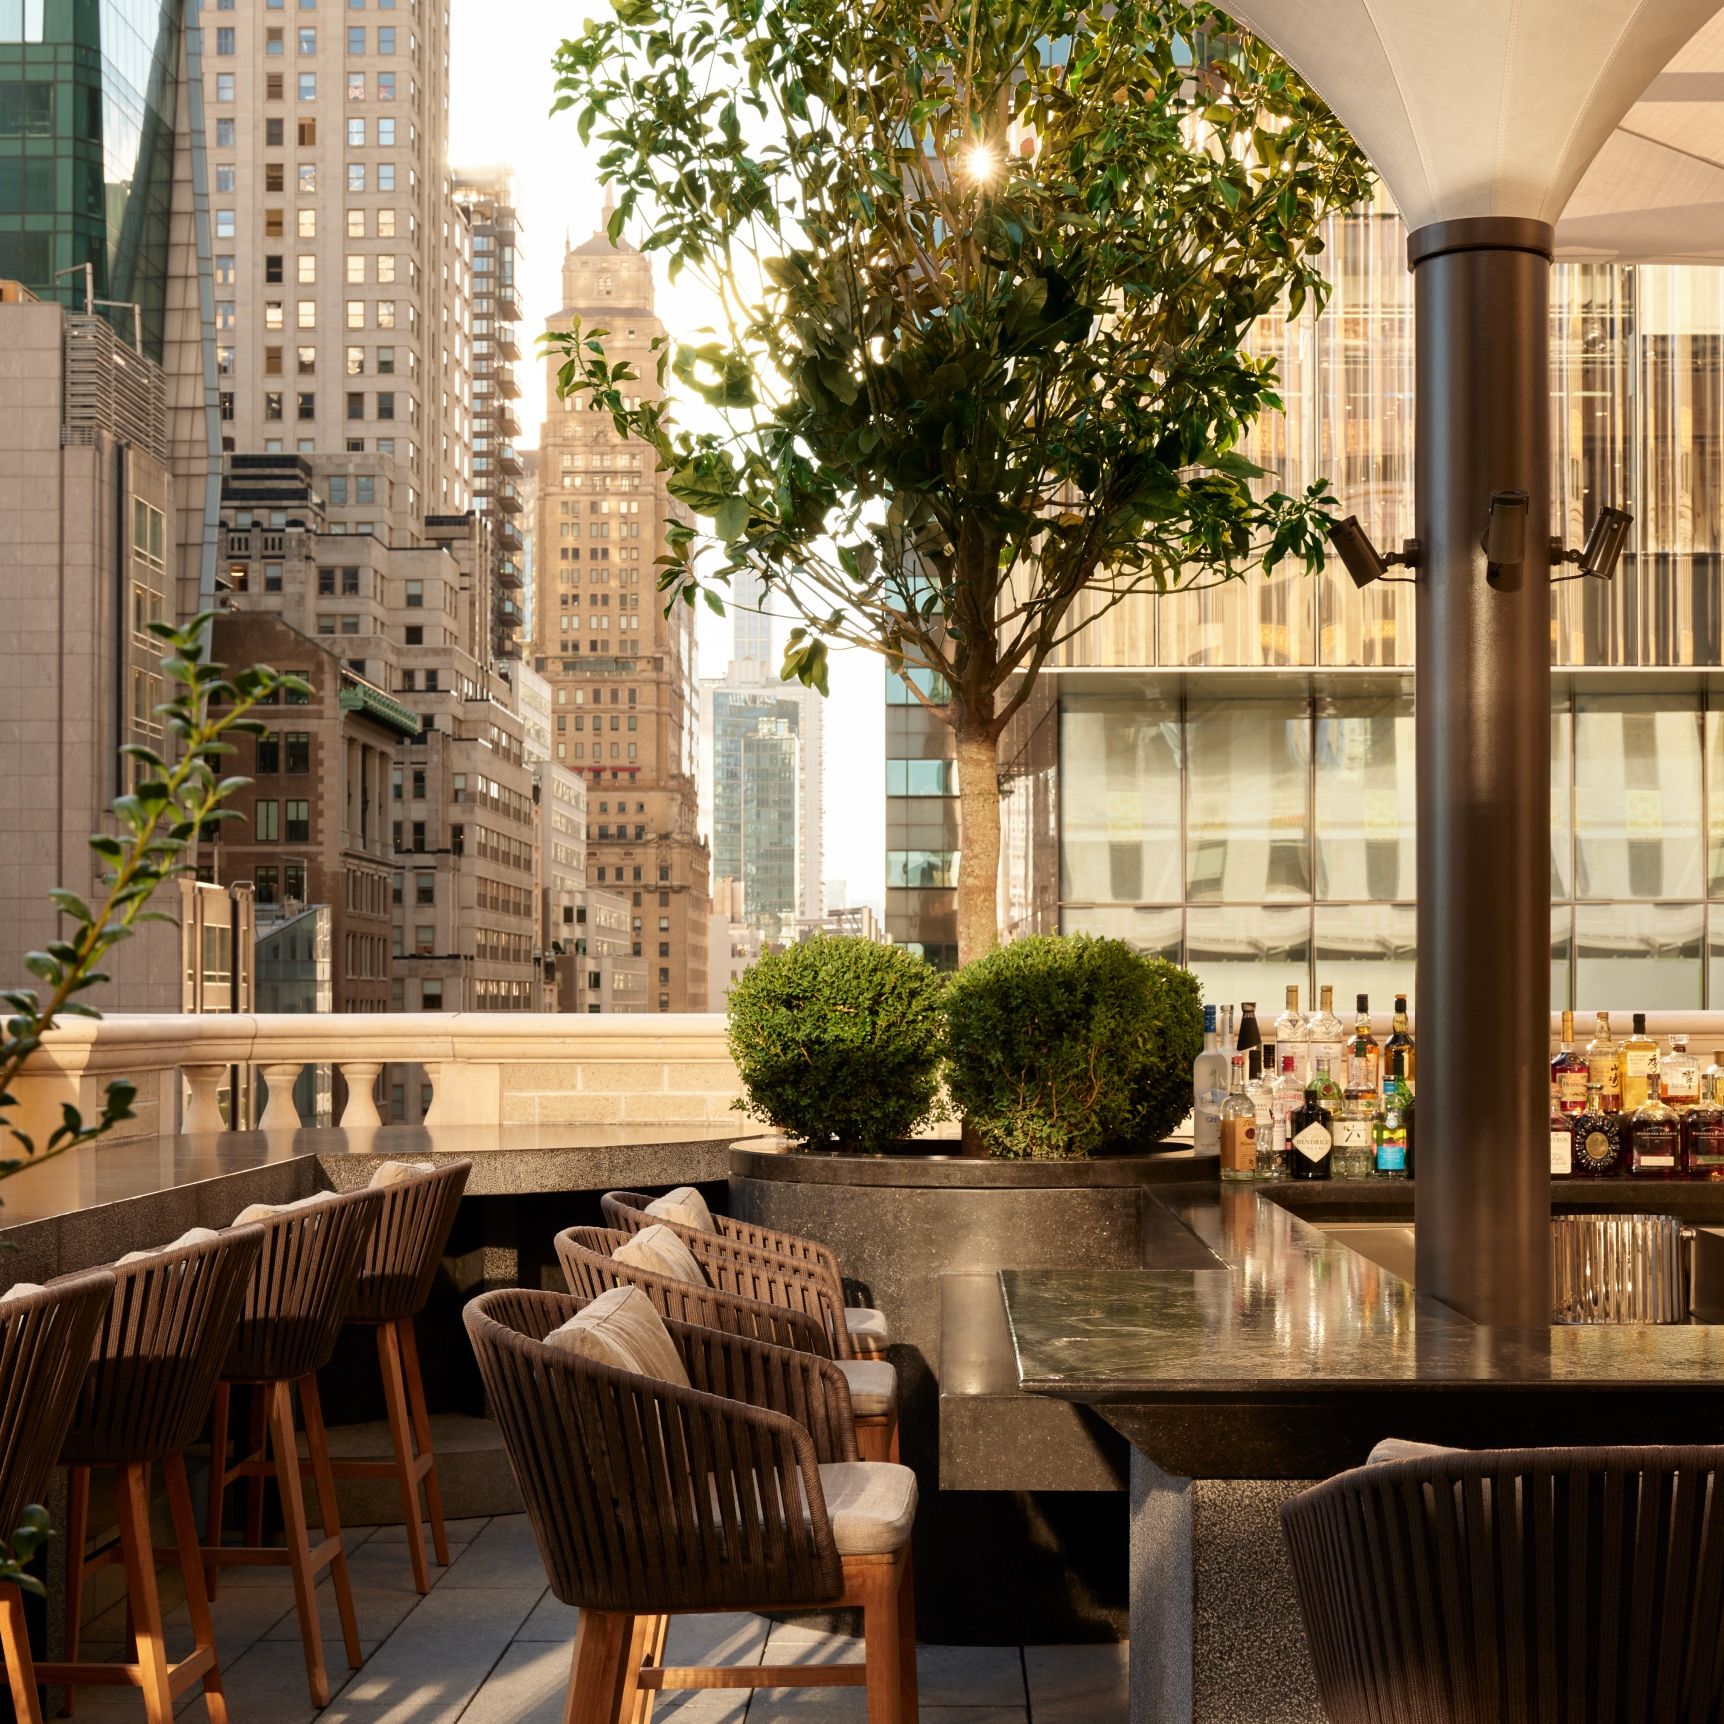 What It's Like to Stay in NYC's Most Expensive Hotel